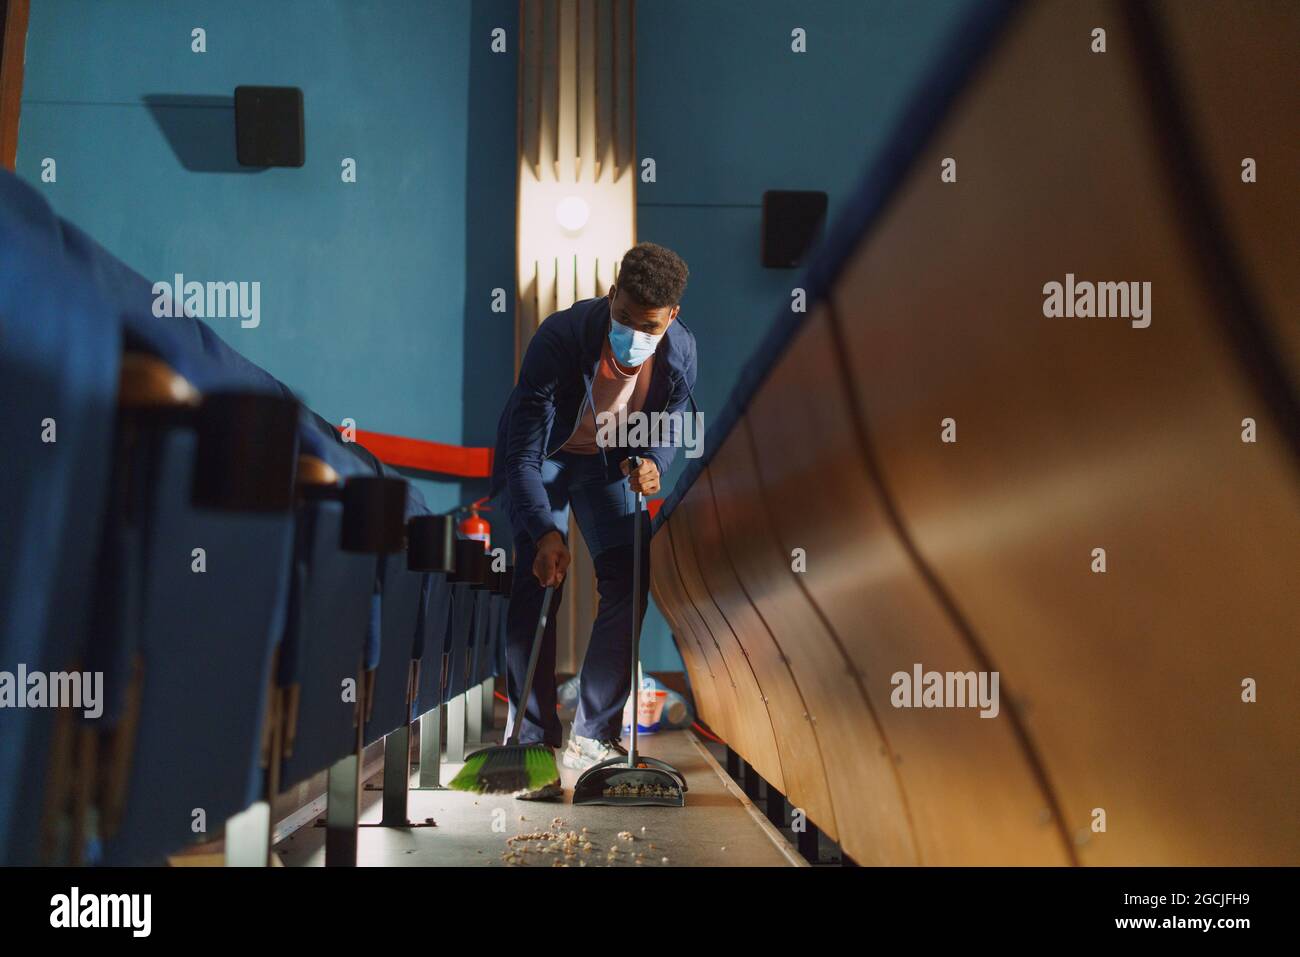 Young man cleaner sweeping floor in the cinema after the film, coronavirus concept. Stock Photo